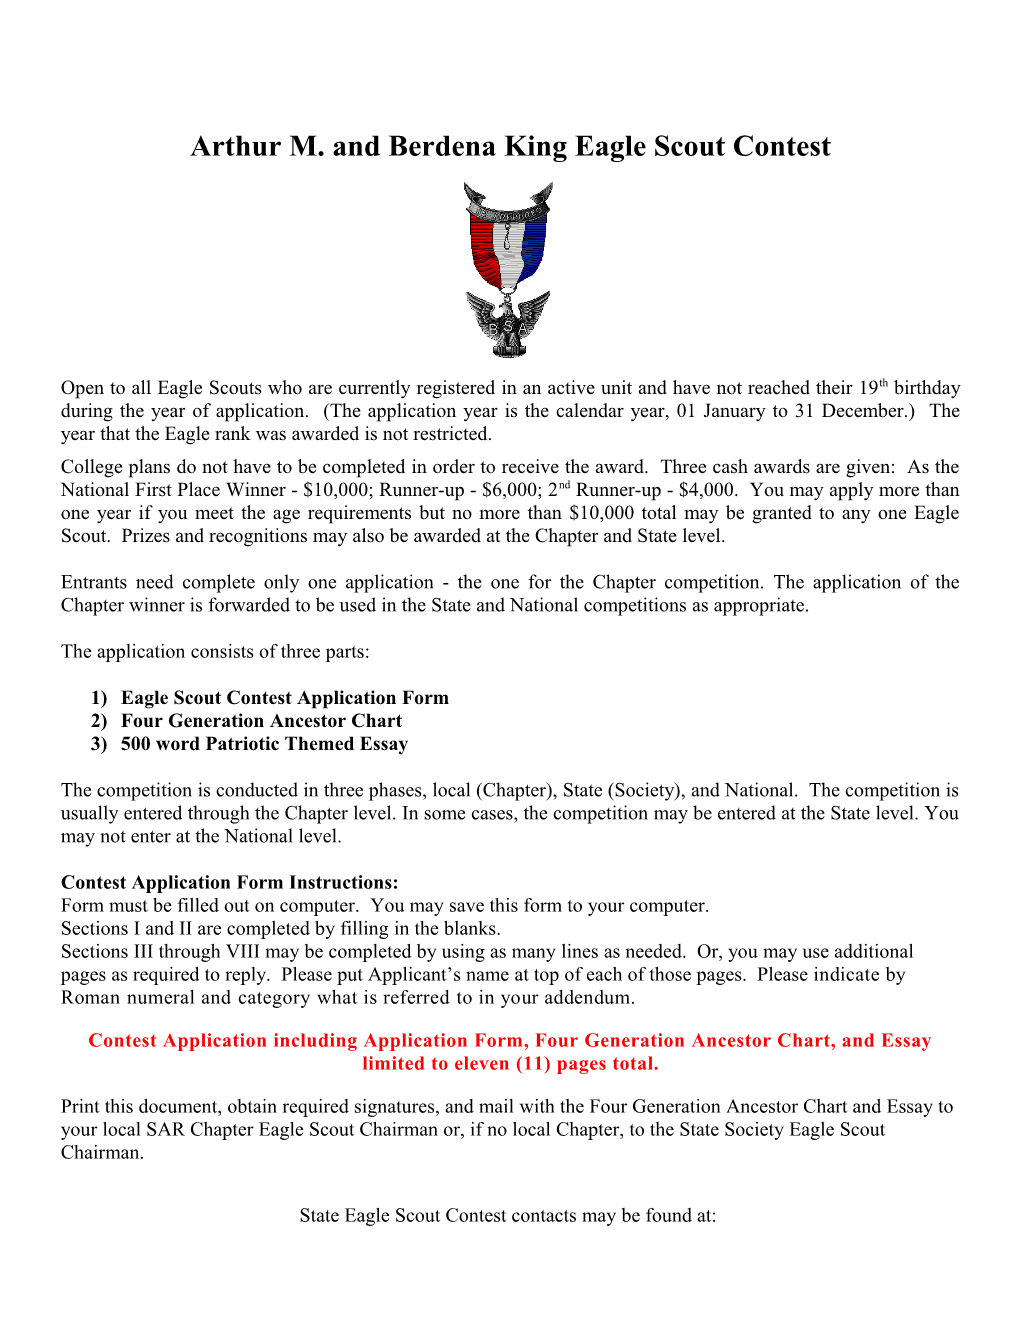 Arthur M. and Berdena King Eagle Scout Contest